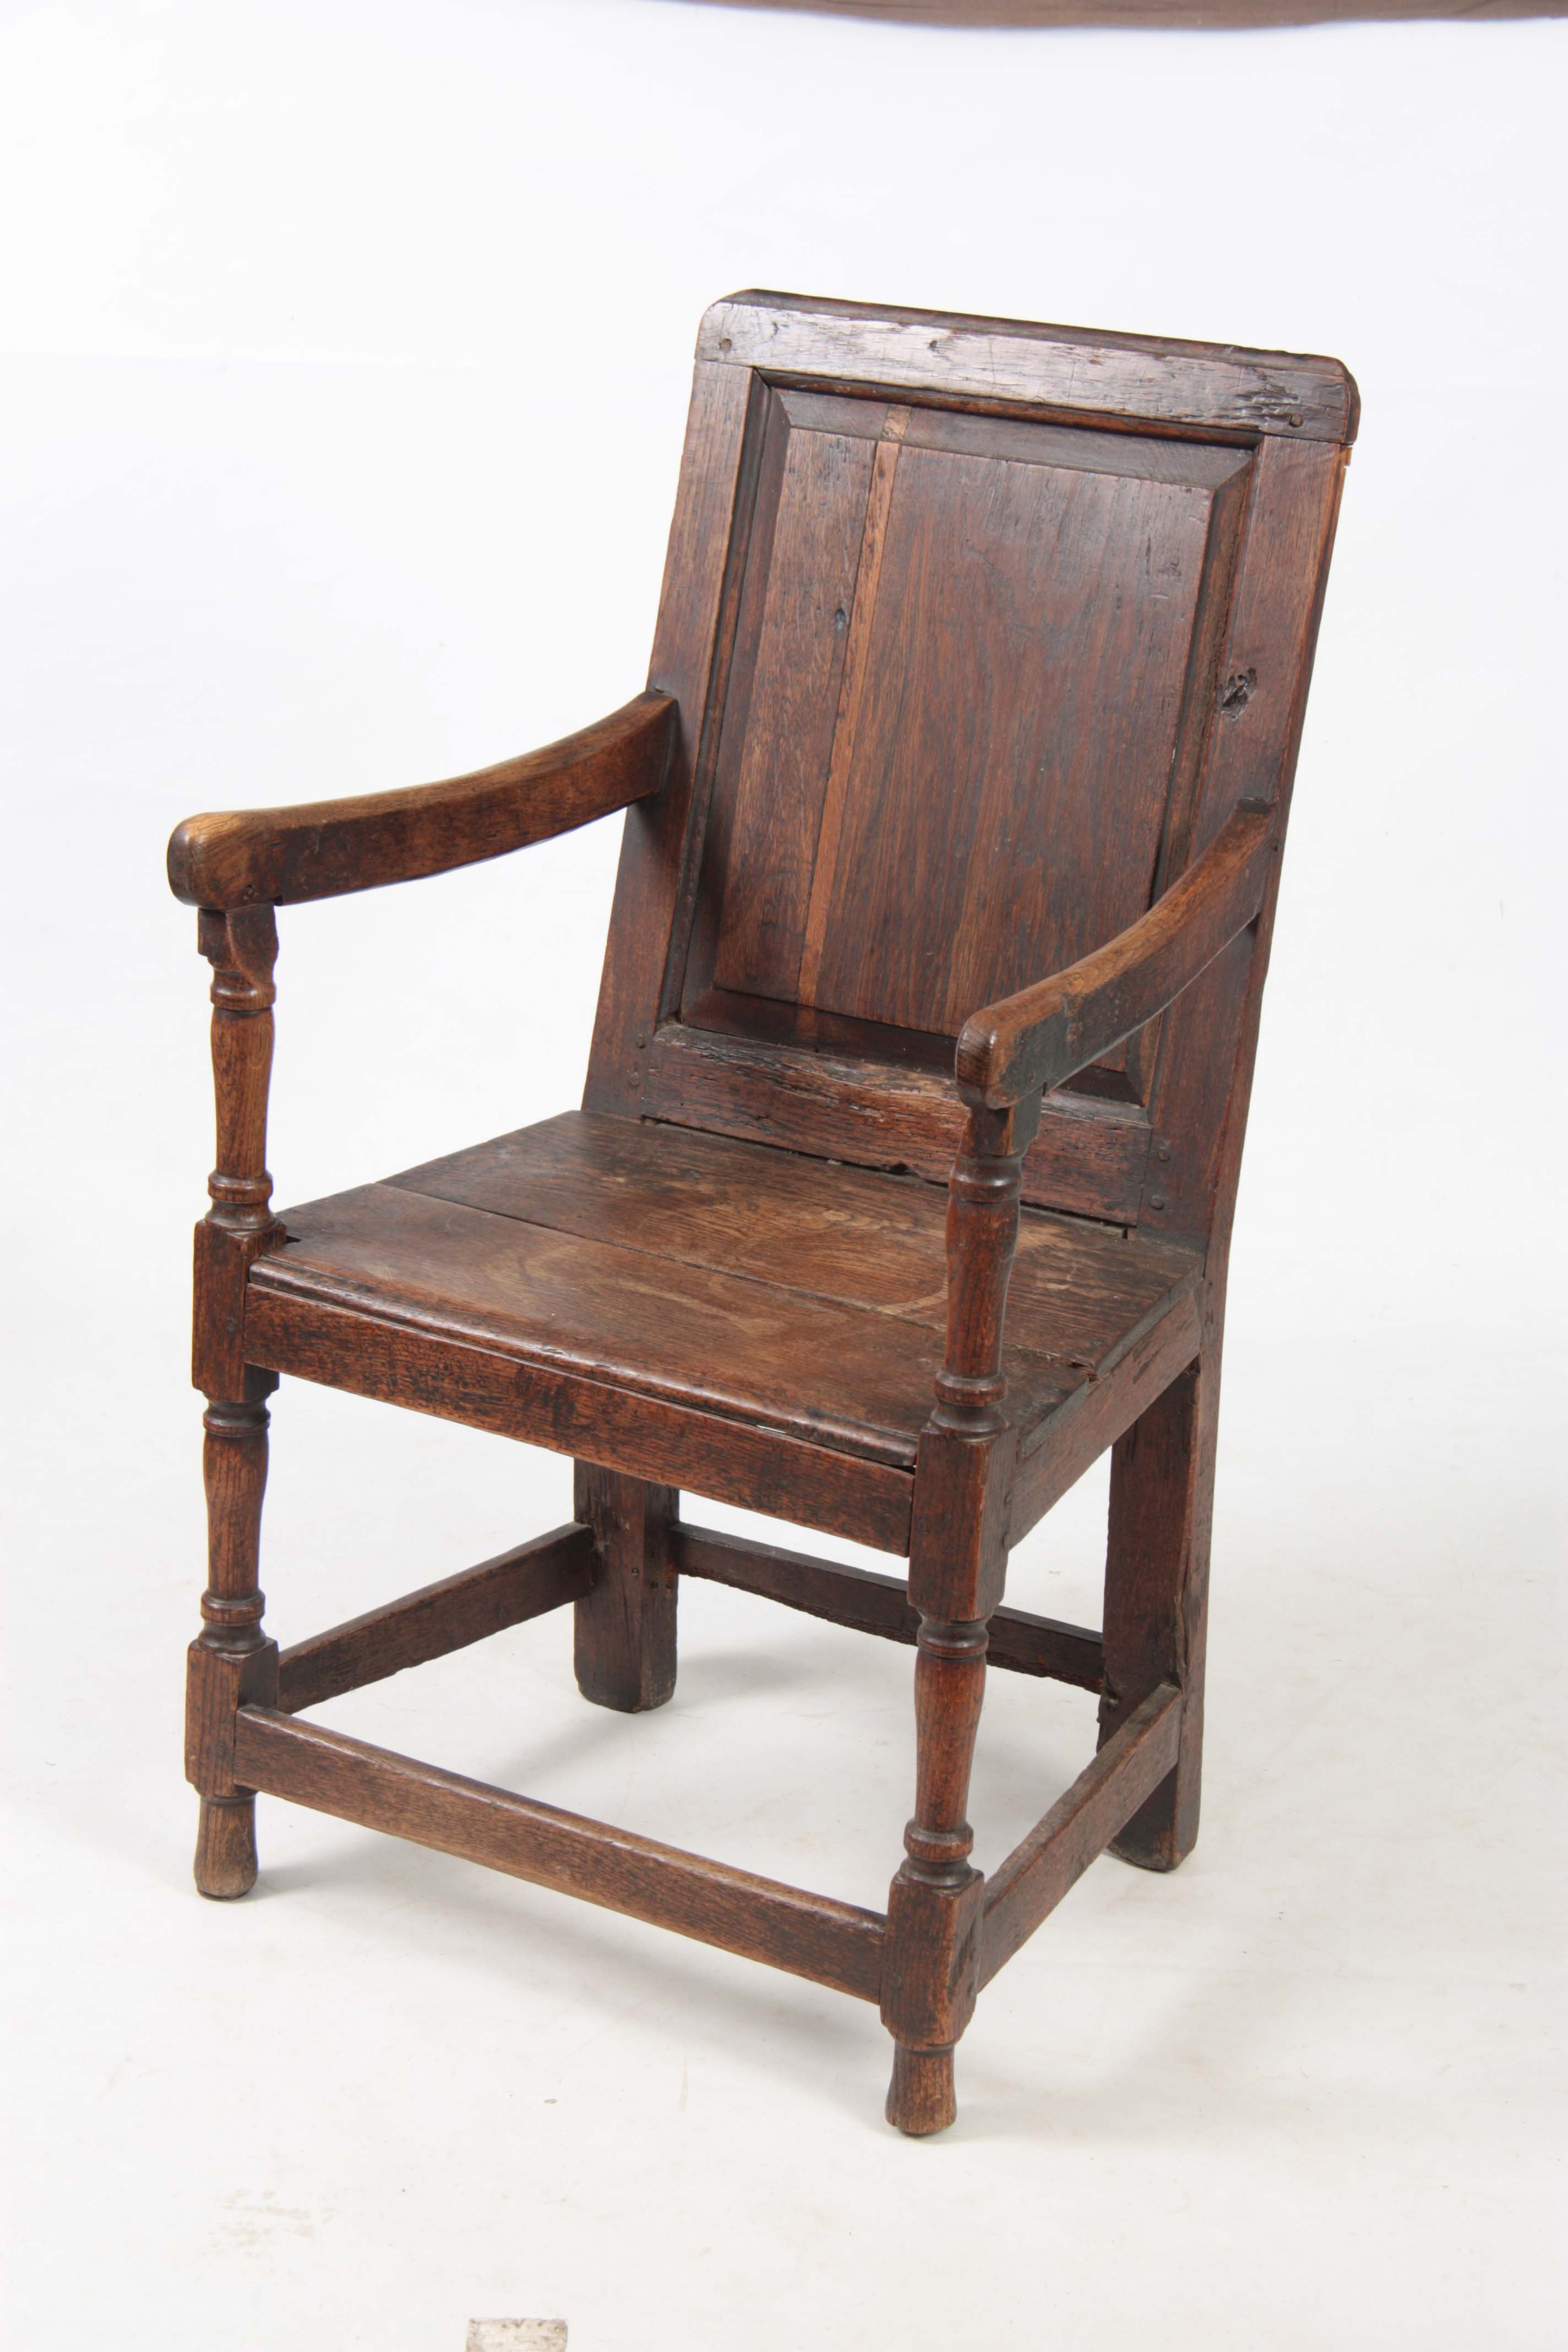 AN EARLY 18TH CENTURY OAK WAINSCOT CHAIR having fielded panel back with open arms and turned - Image 4 of 5